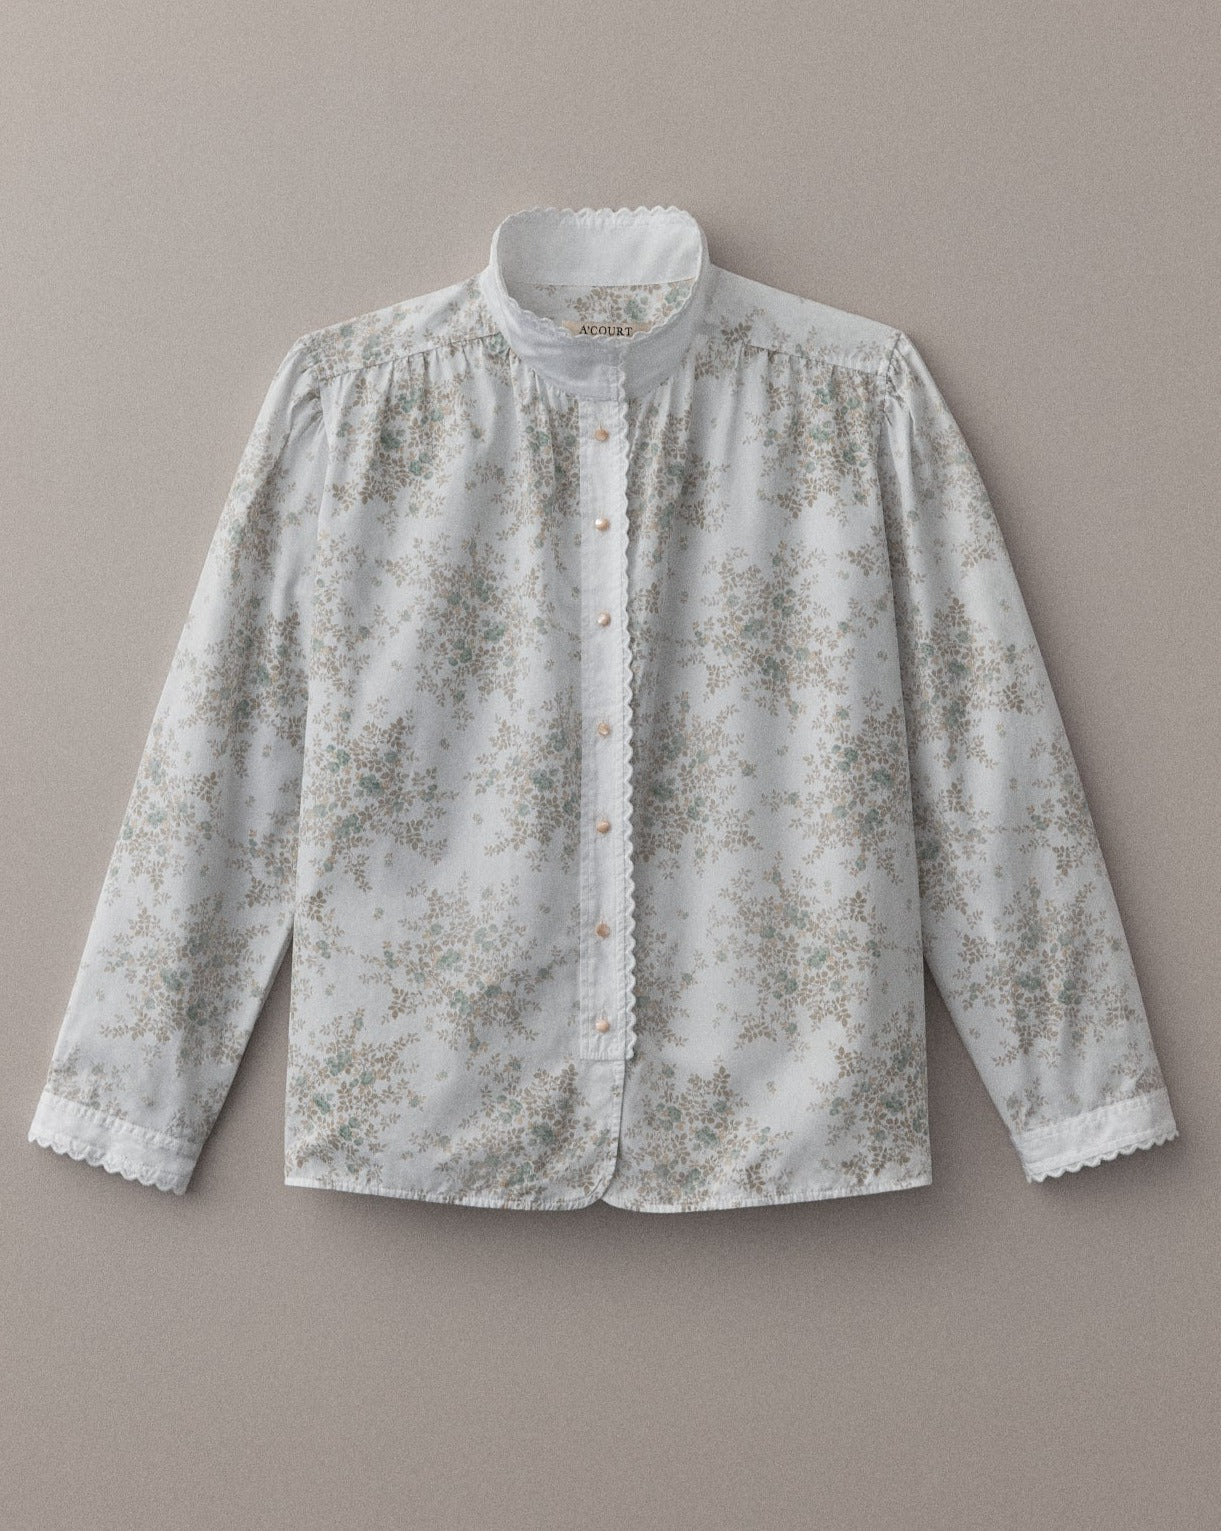 A long sleeve blouse in floral cotton with eyelet trim at the collar and cuffs lies flat on a light brown field.